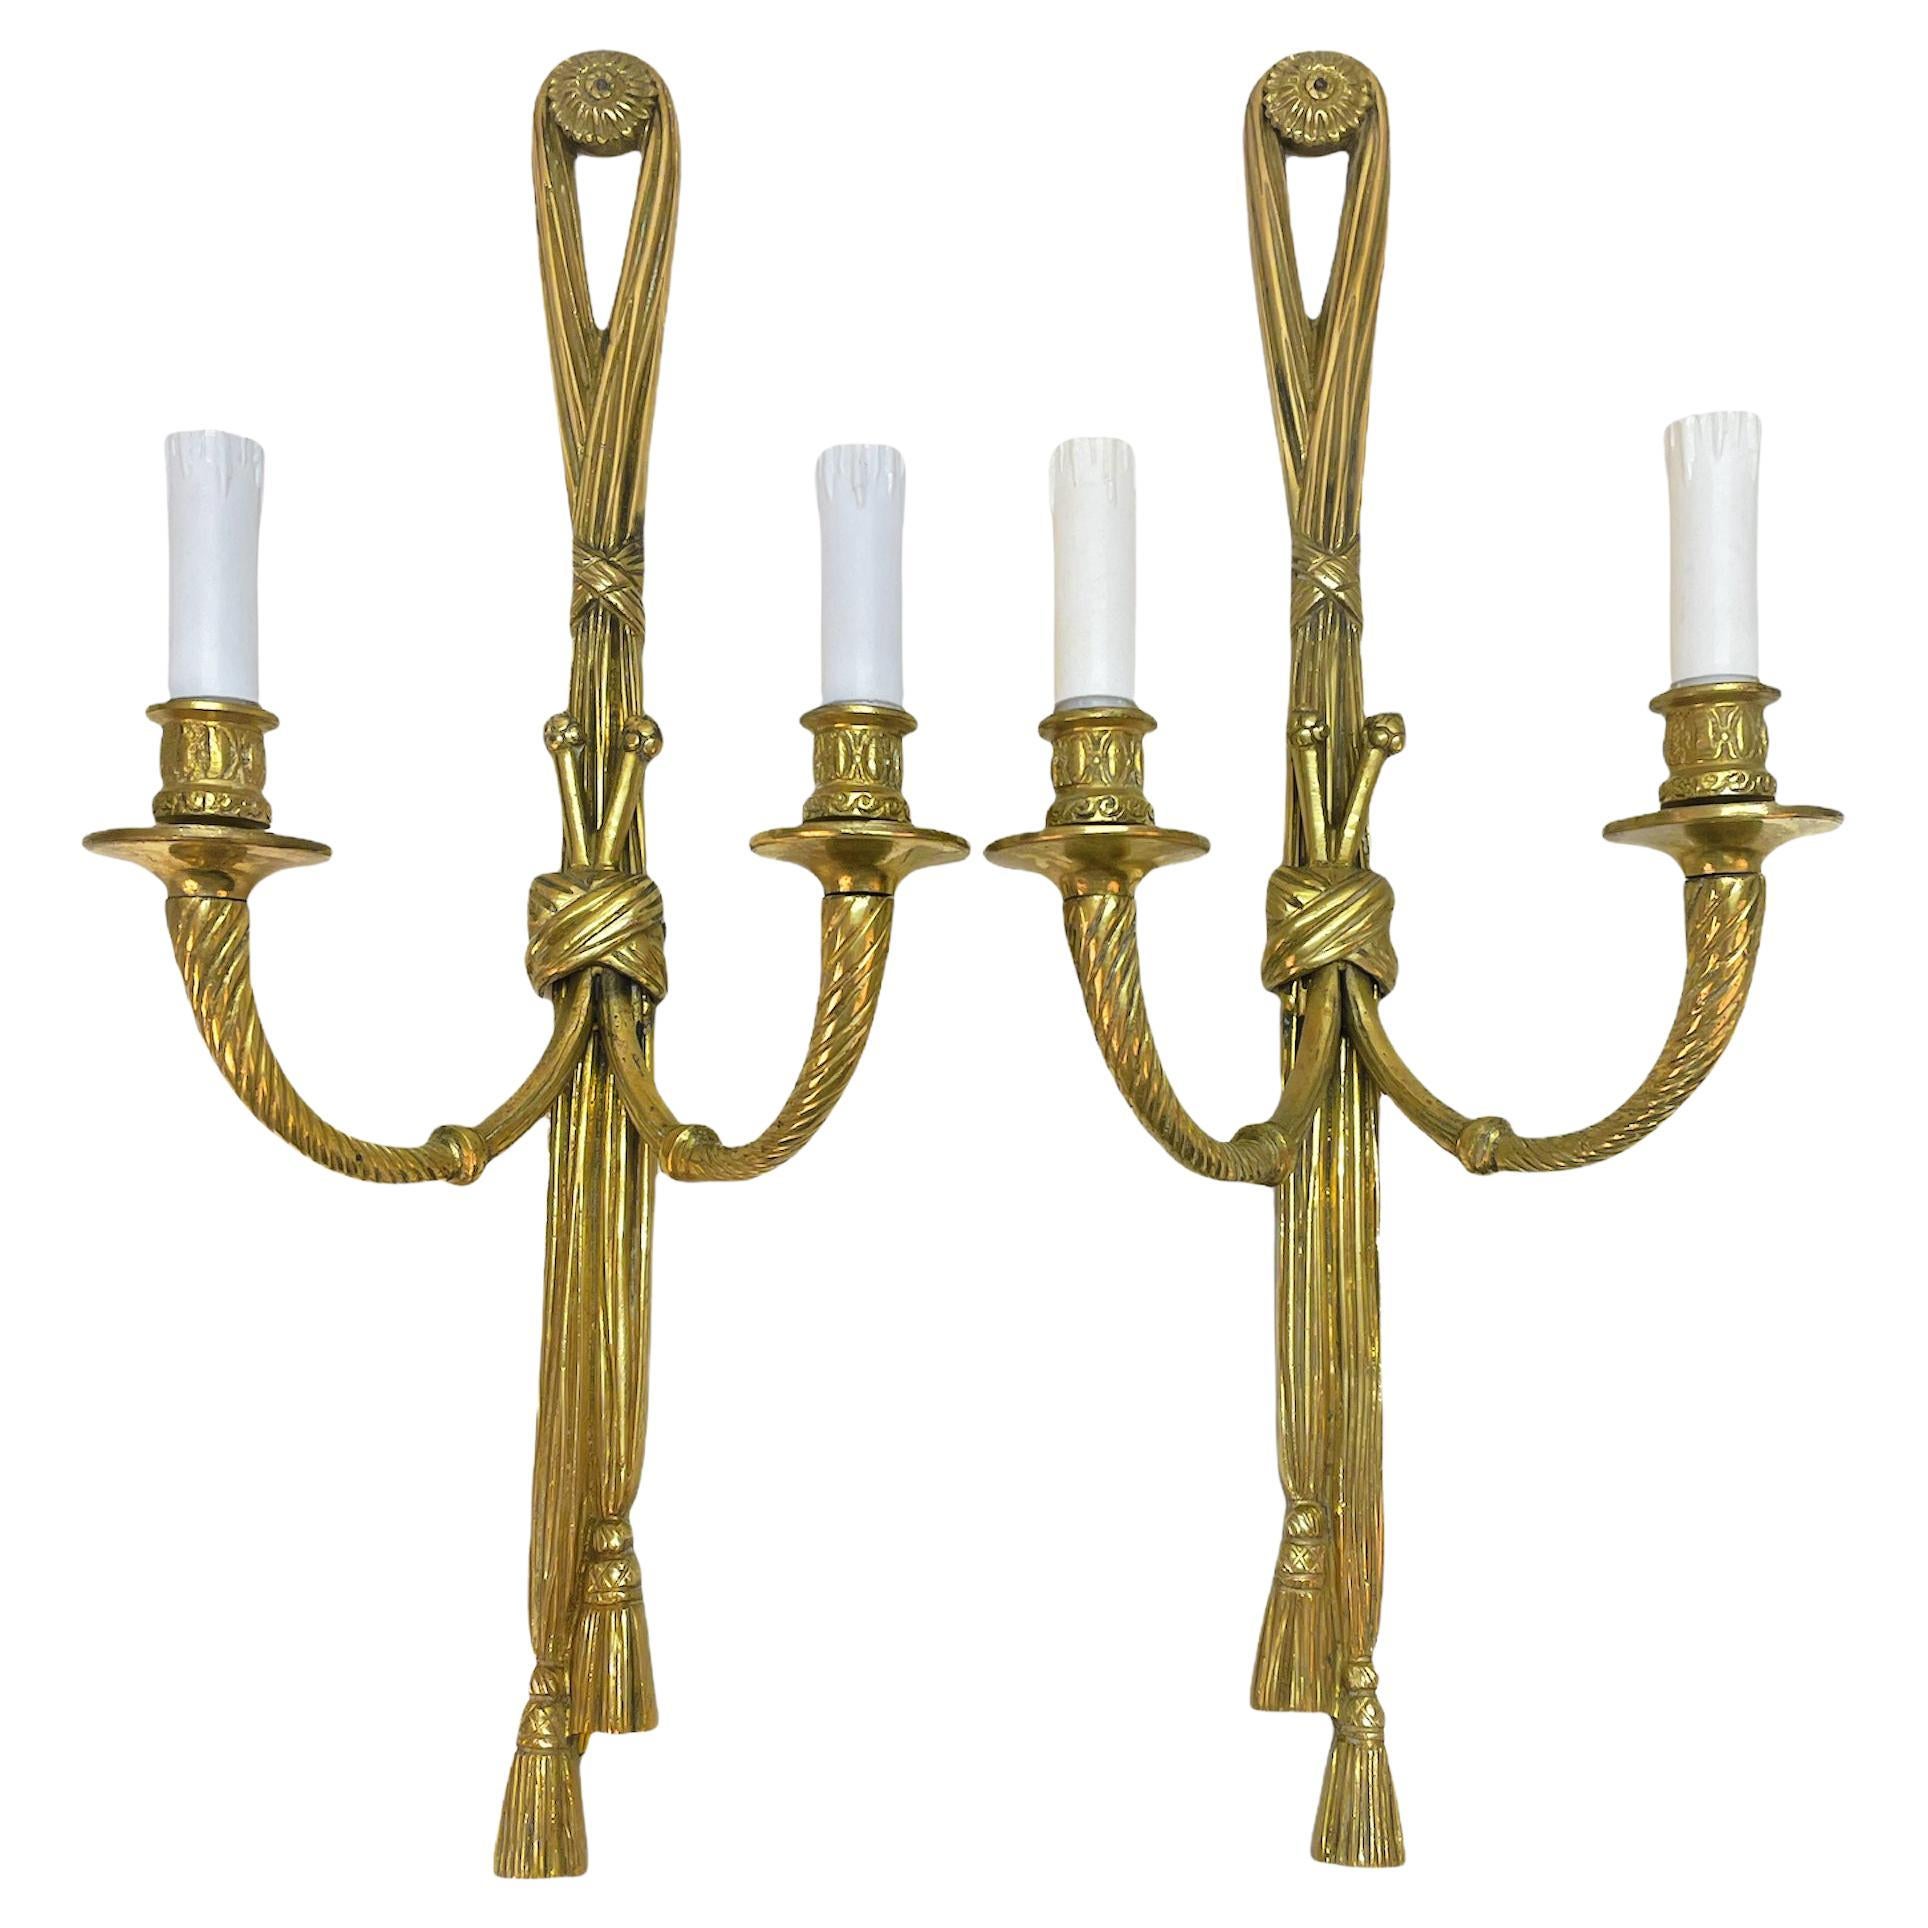 Pair of 19th Century Louis XVI Style Knot & Tassel Appliqué Wall Candle Sconces